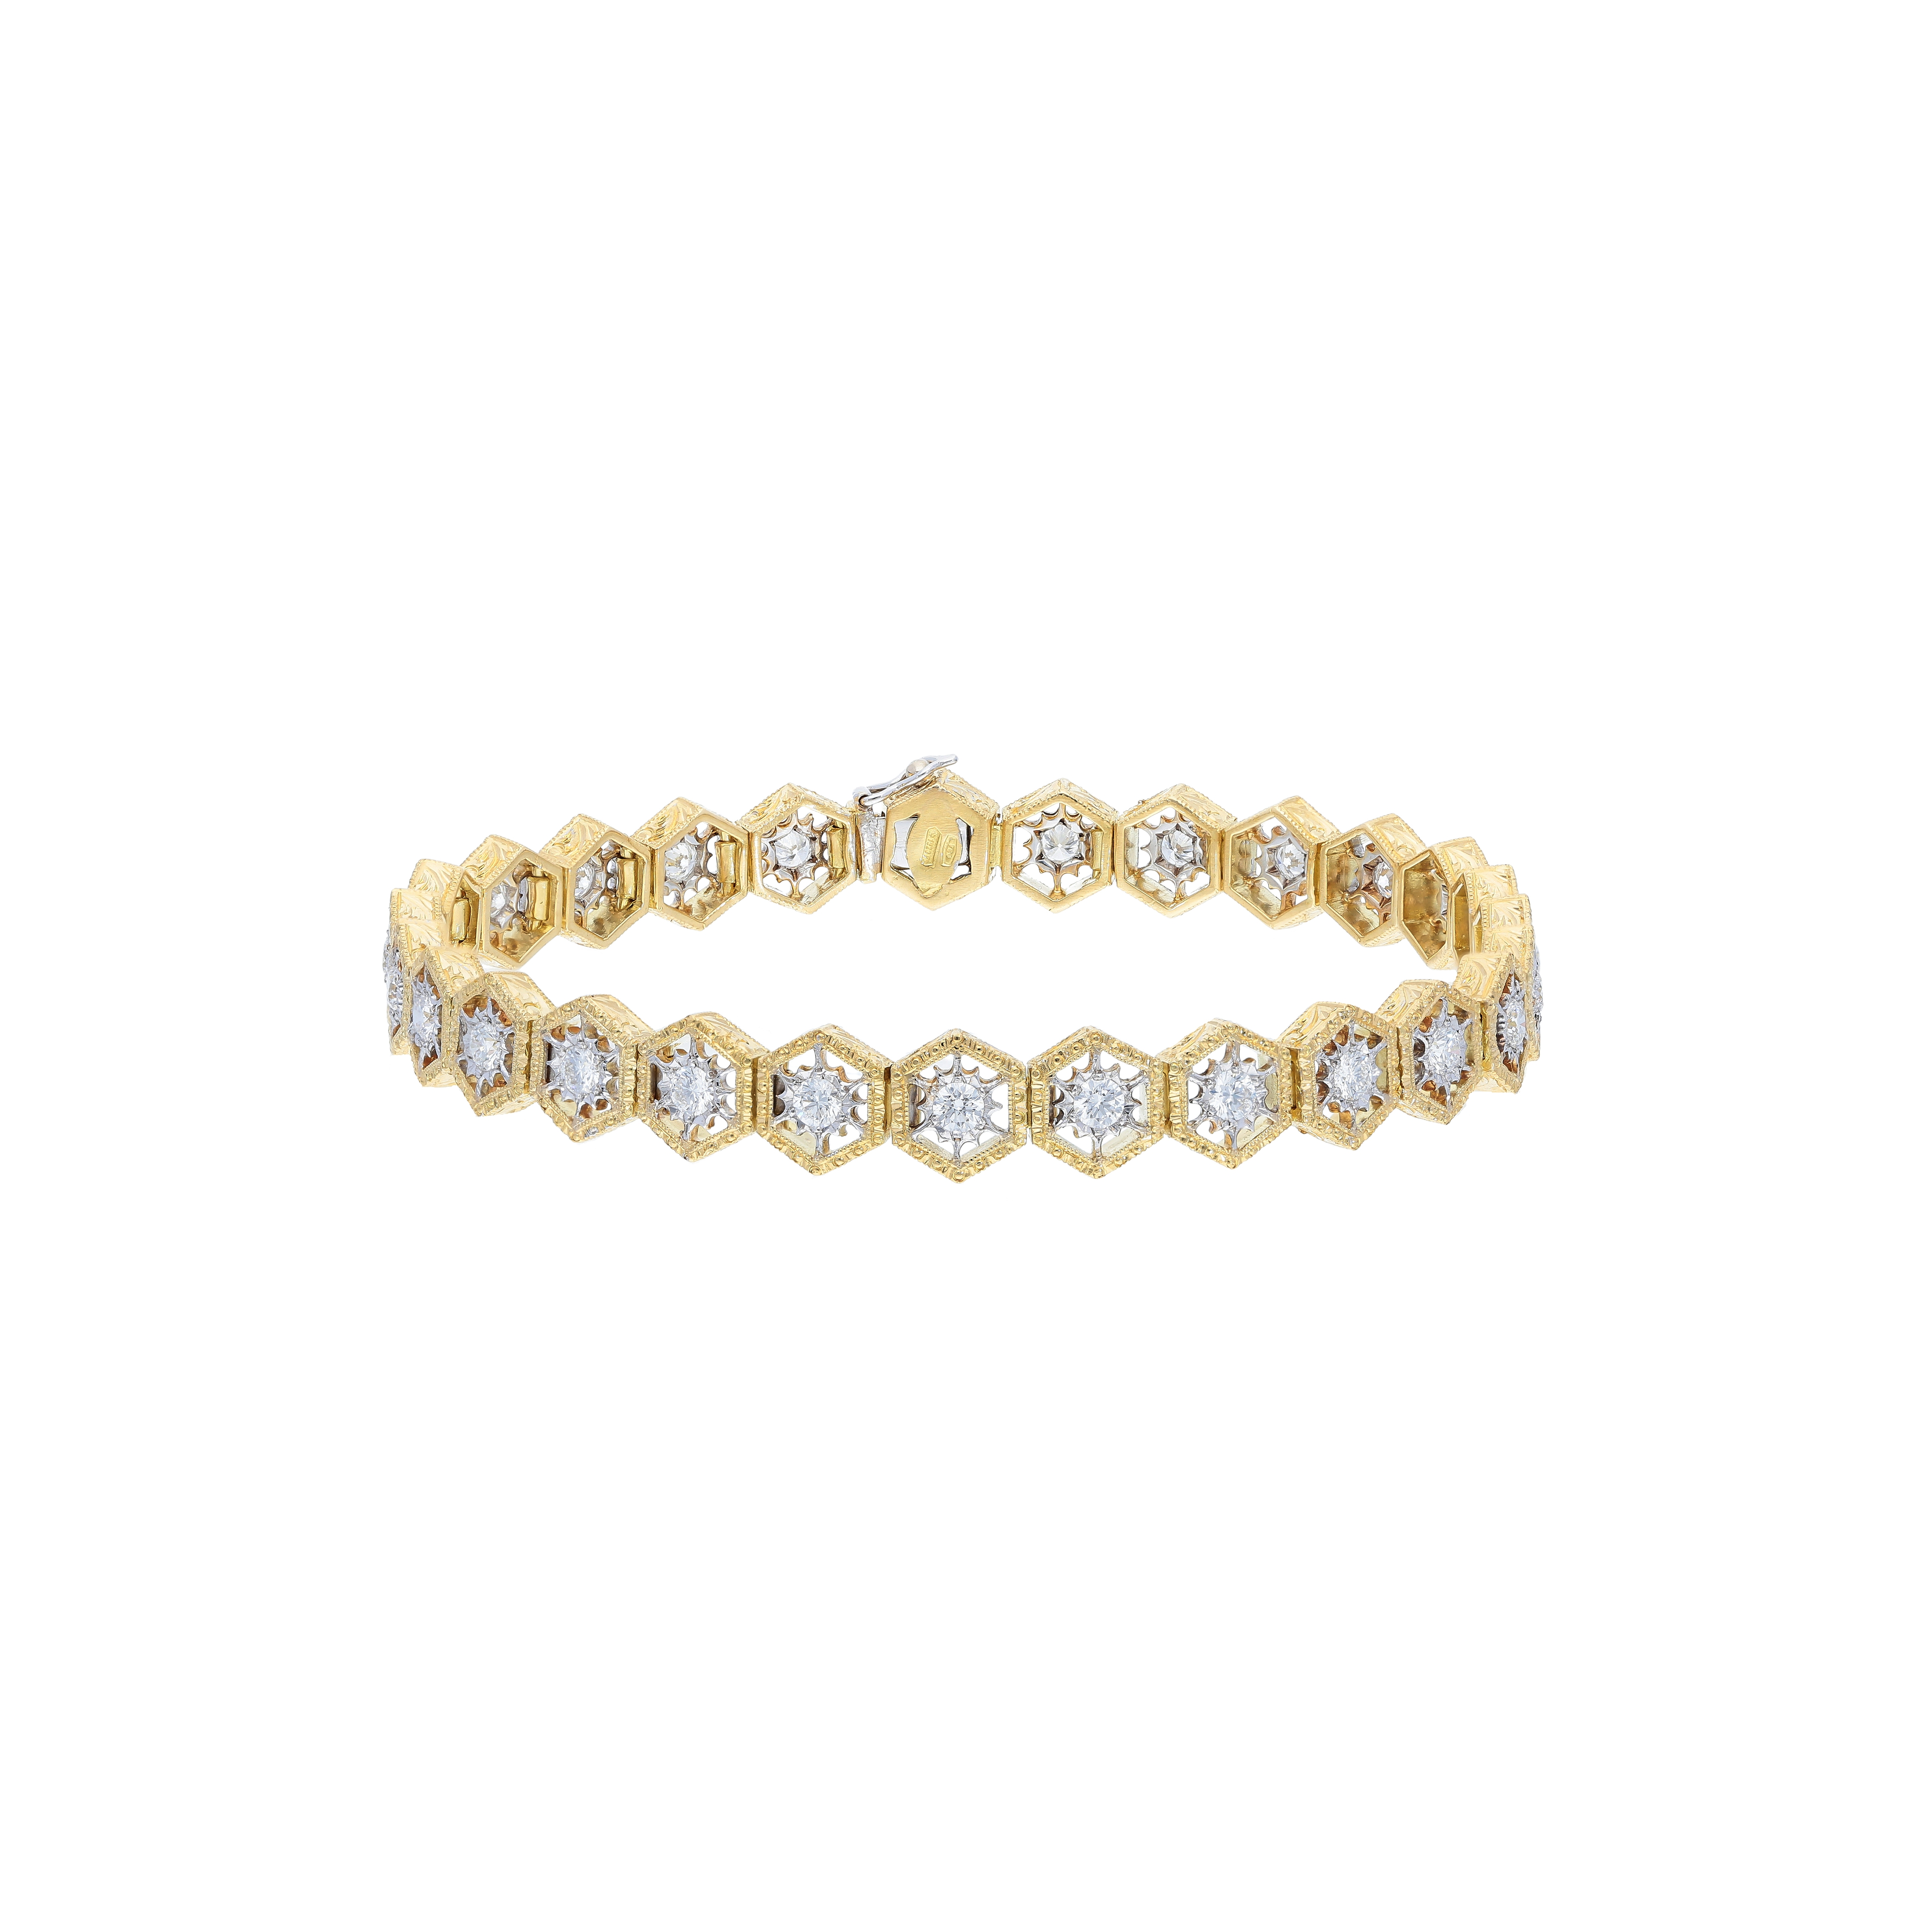 Florentine jewelry bracelet in 18kt yellow and white gold with diamonds